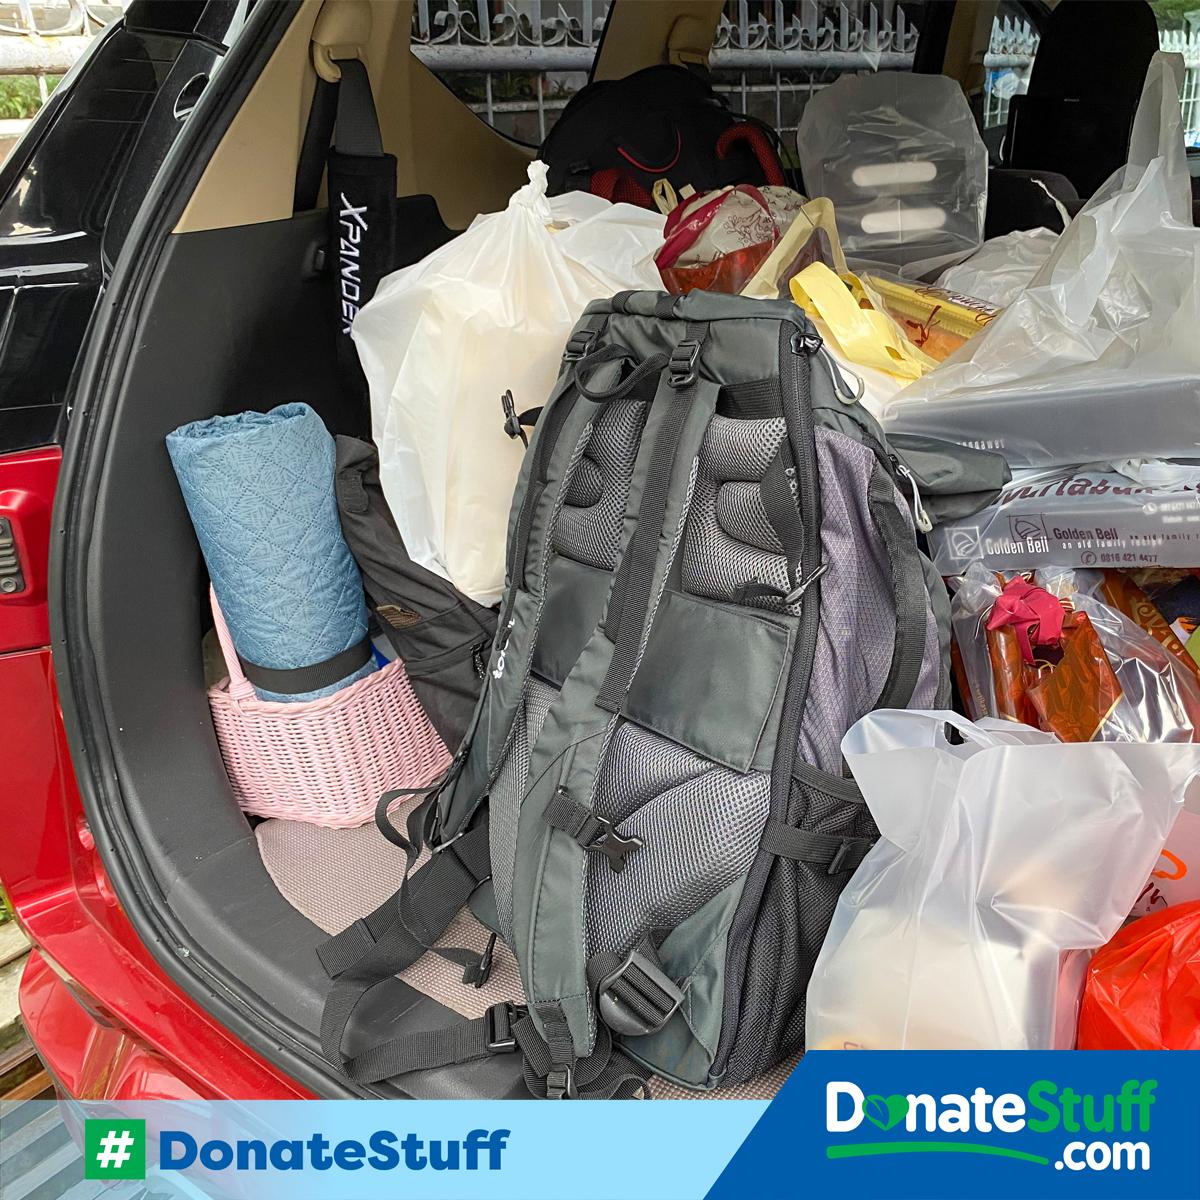 🎉 Say goodbye to trunk-stuffing hassles! 🚗 Instead, use our FREE donation pickup service.😎 With just a few clicks, your donations will be whisked away by our friendly team. 📦💨 #DonateStuff #SupportCharity #ChooseYourDonationCharity